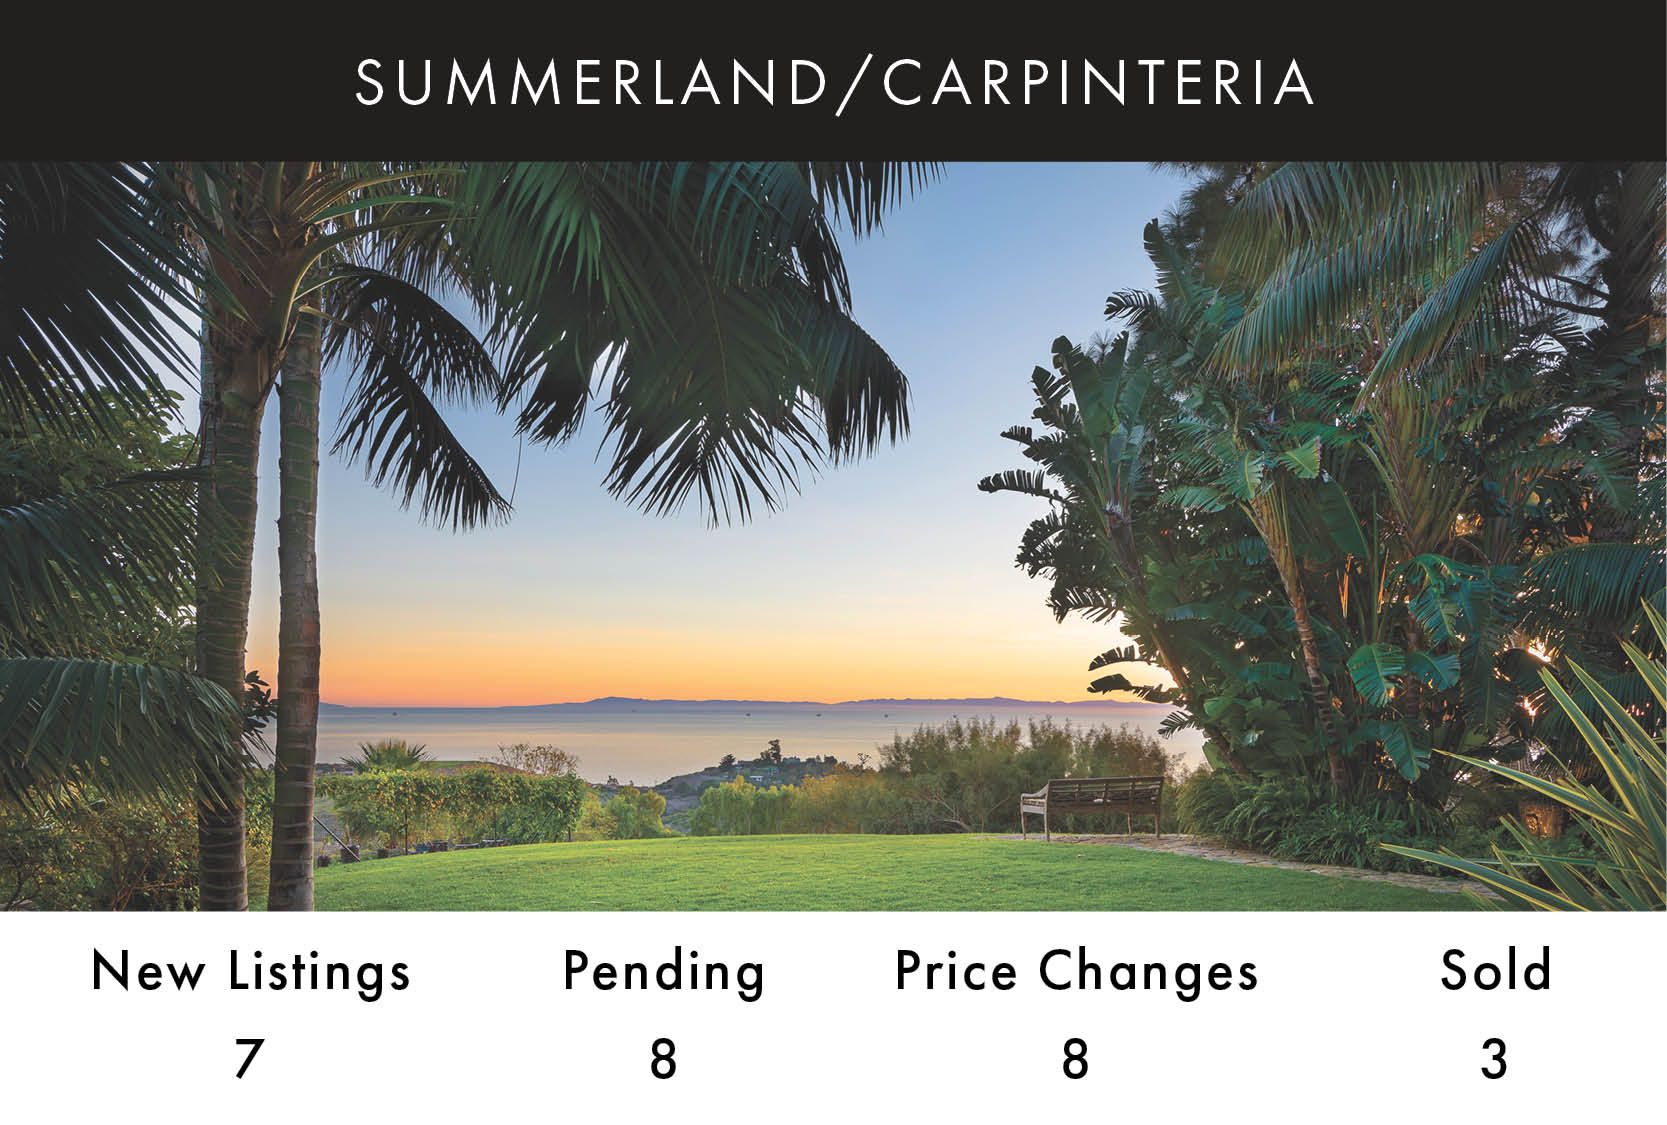 Graphic with photo showing September 2022 Summerland/Carpinteria home sale statistics